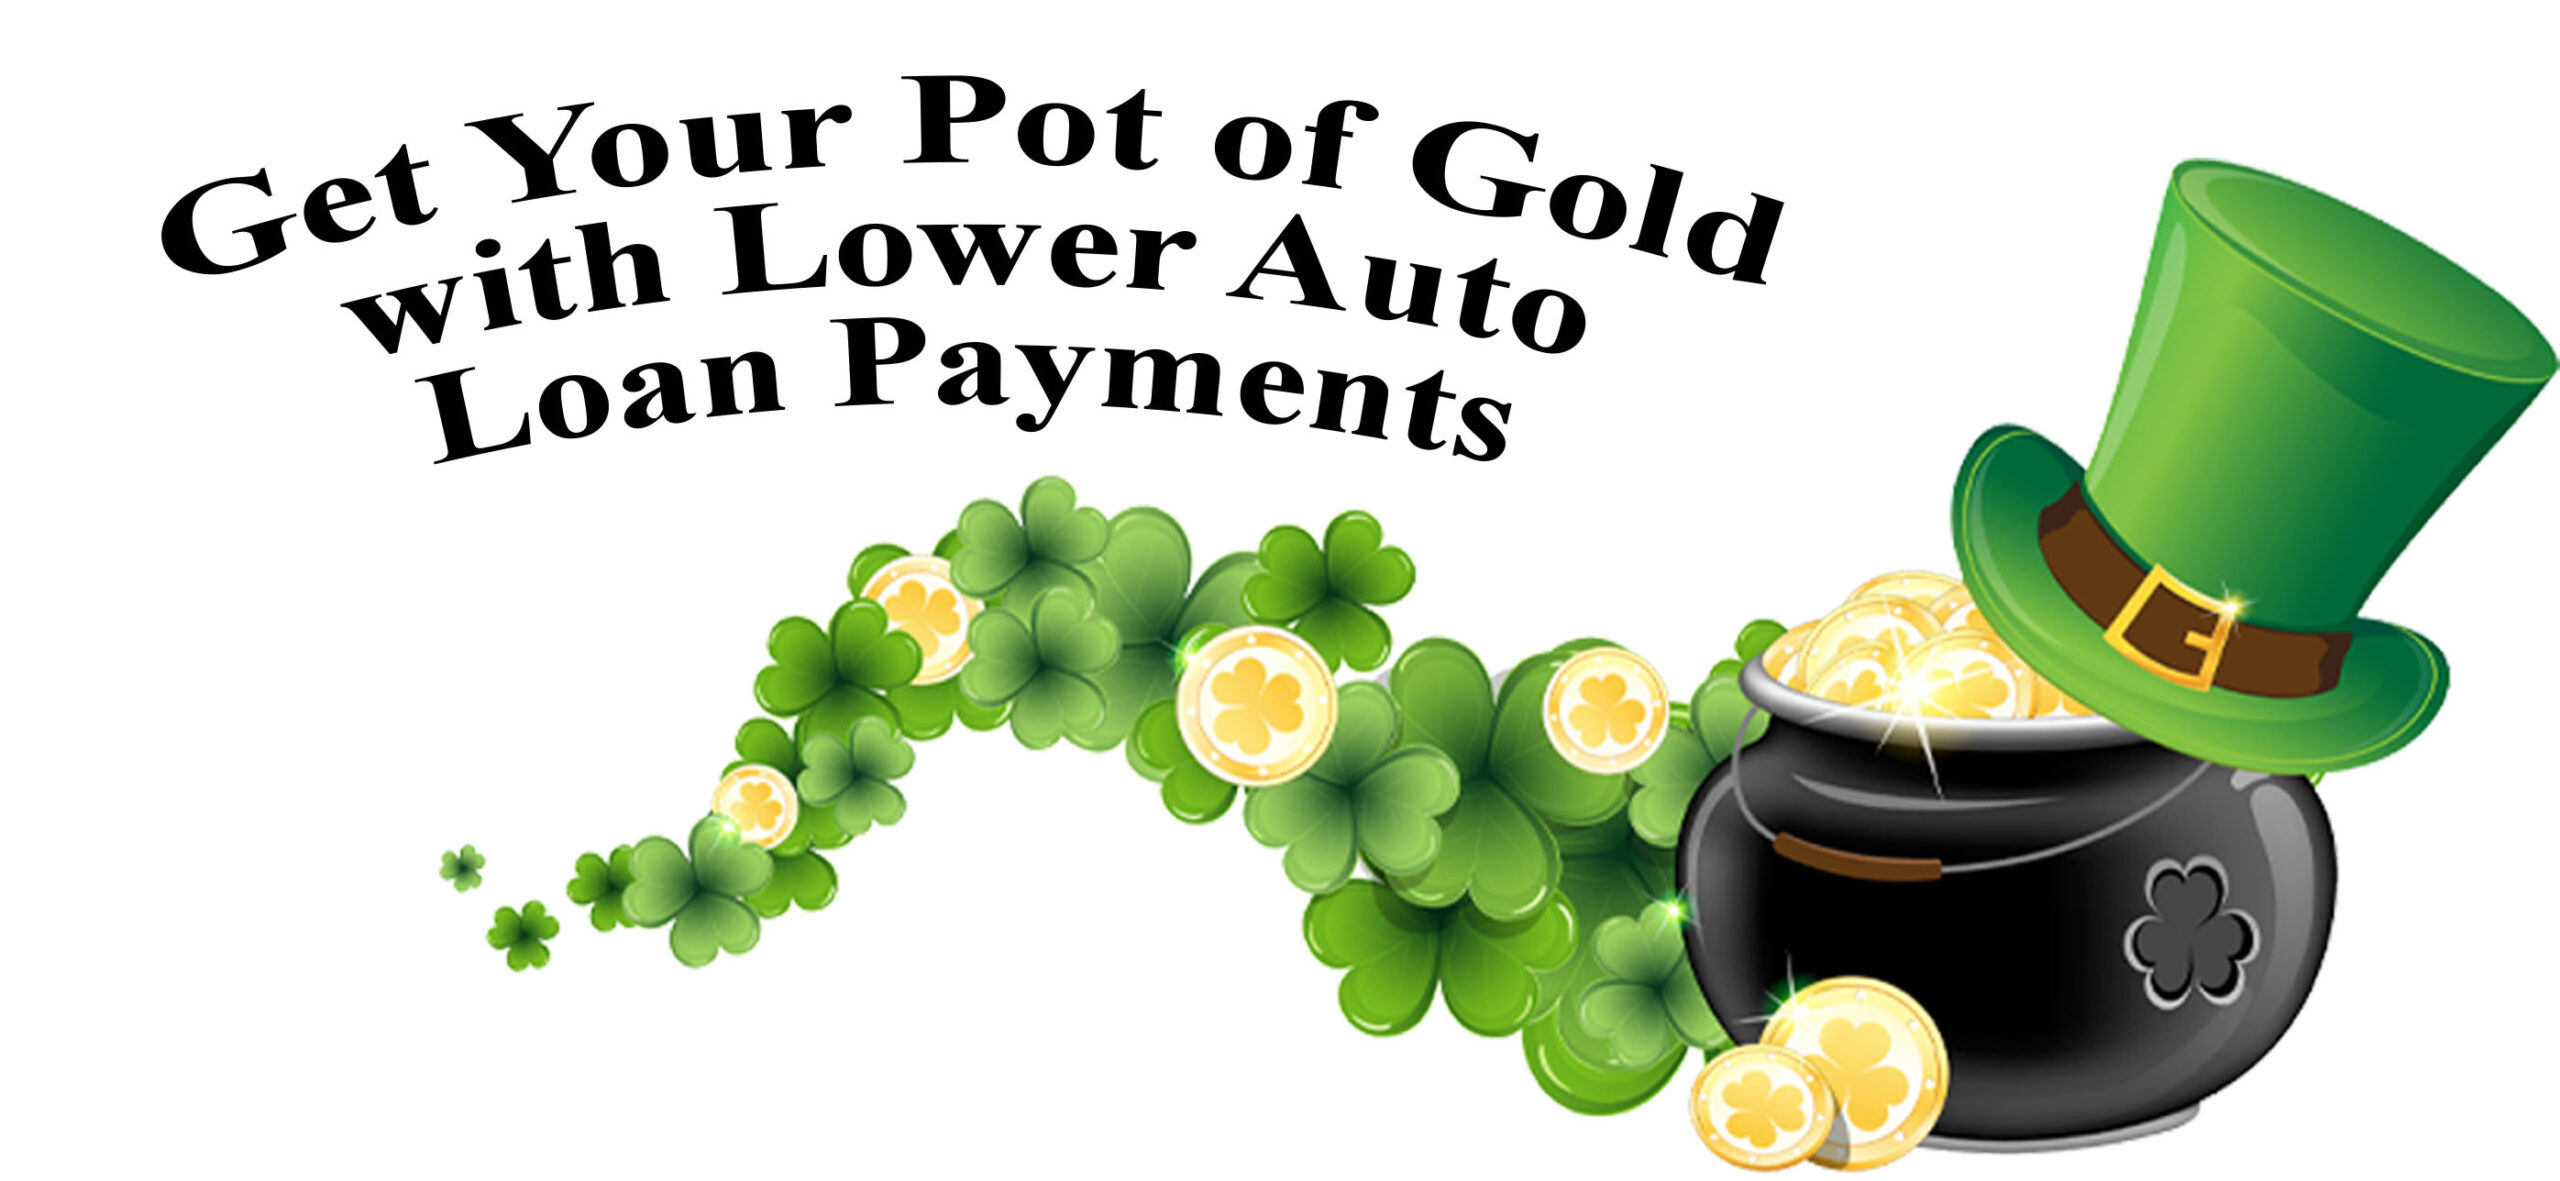 Get your pot of gold with lower auto loan payments